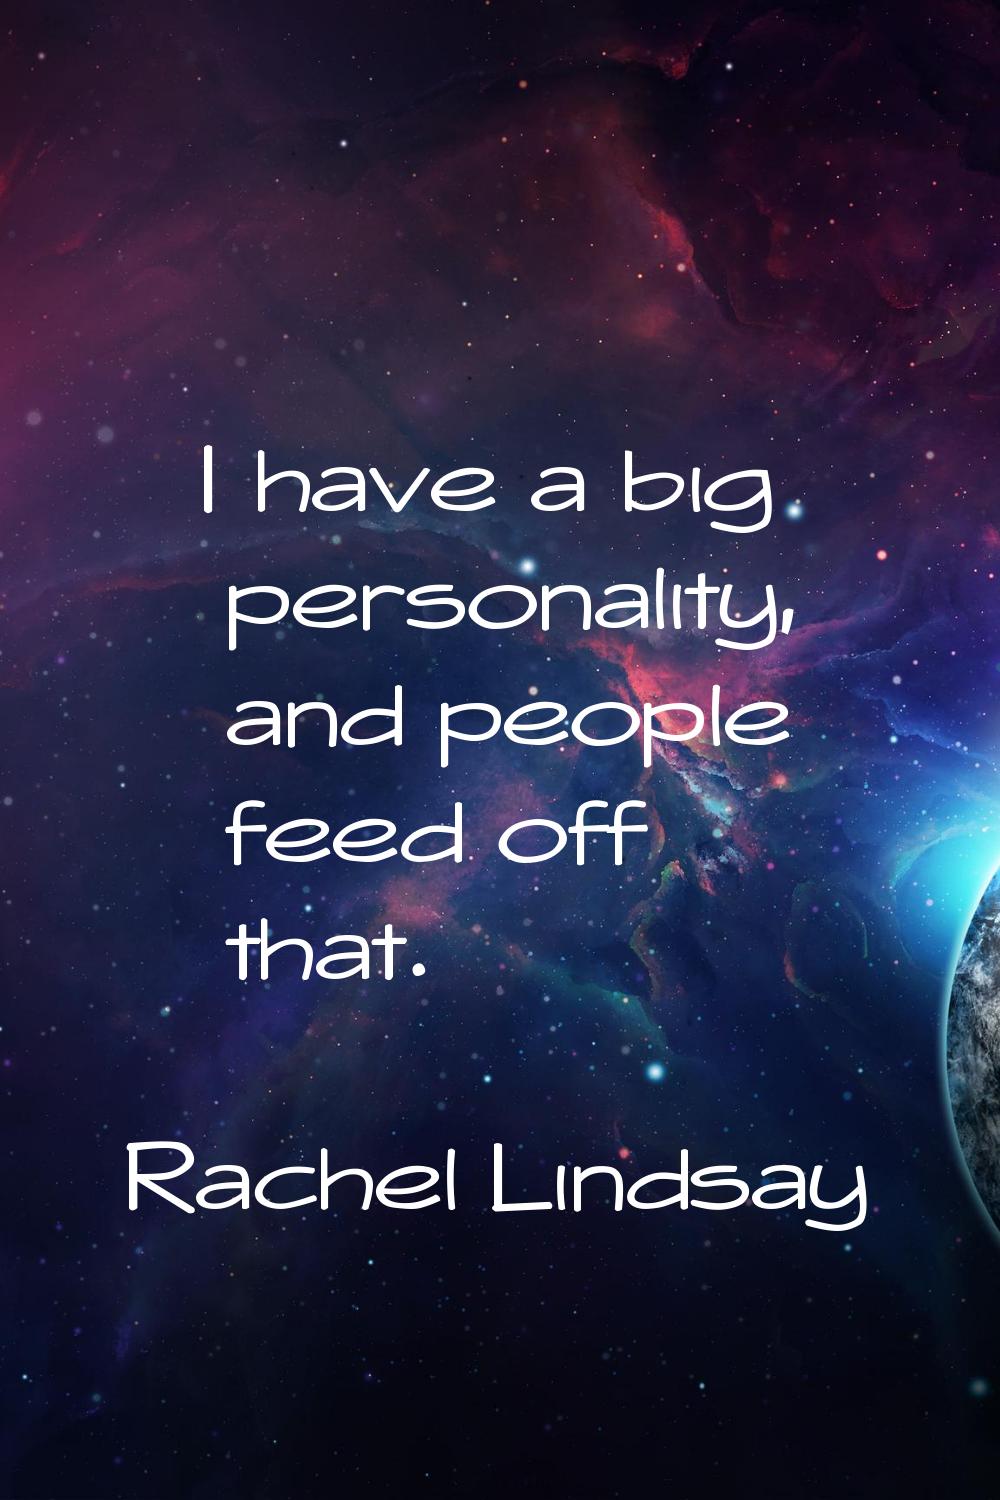 I have a big personality, and people feed off that.